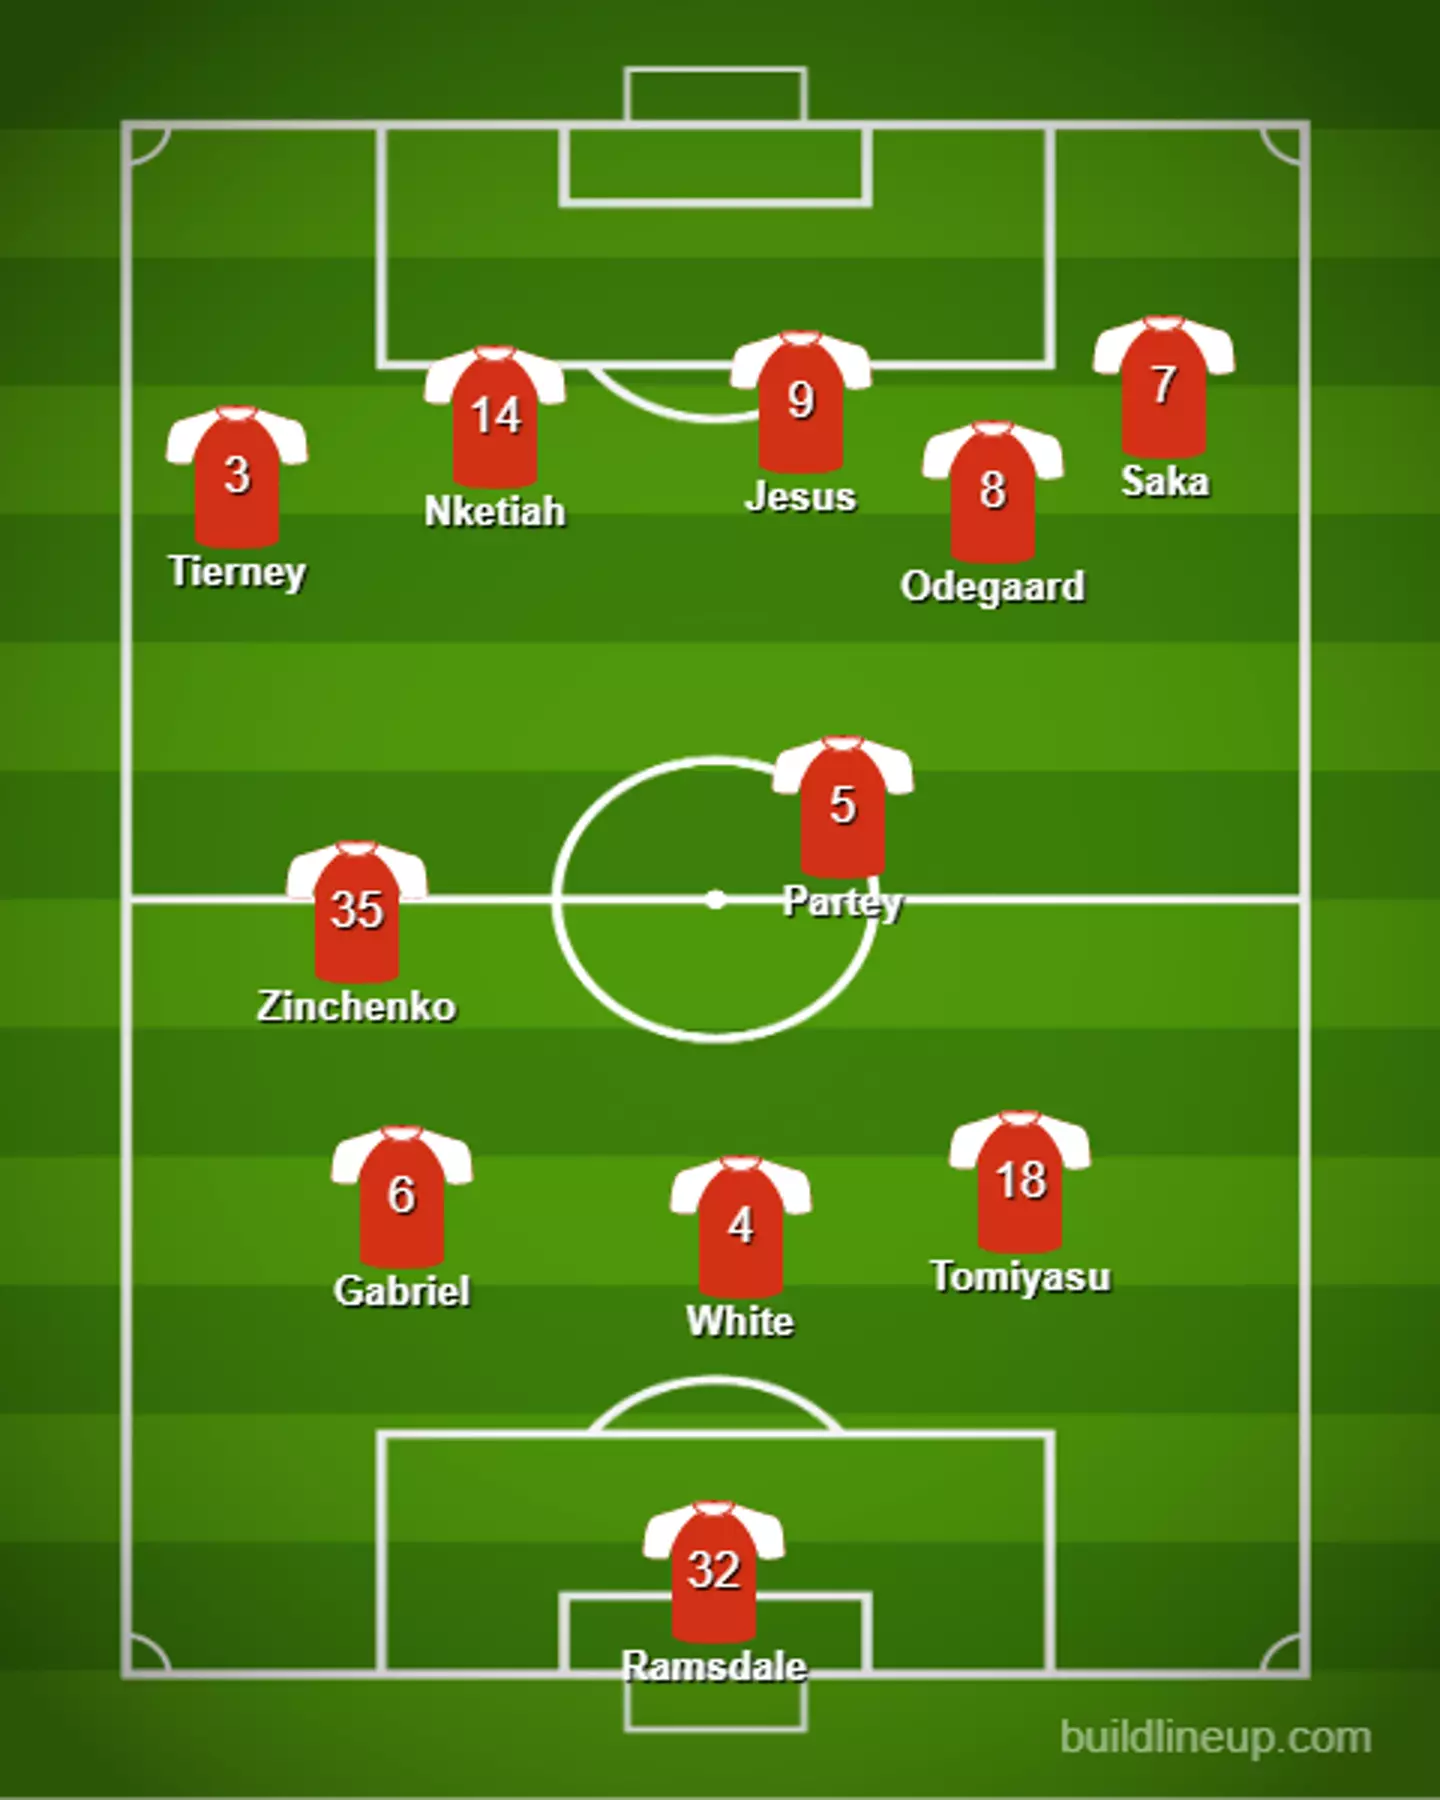 How Arsenal could line up with both Nketiah and Jesus in the team.